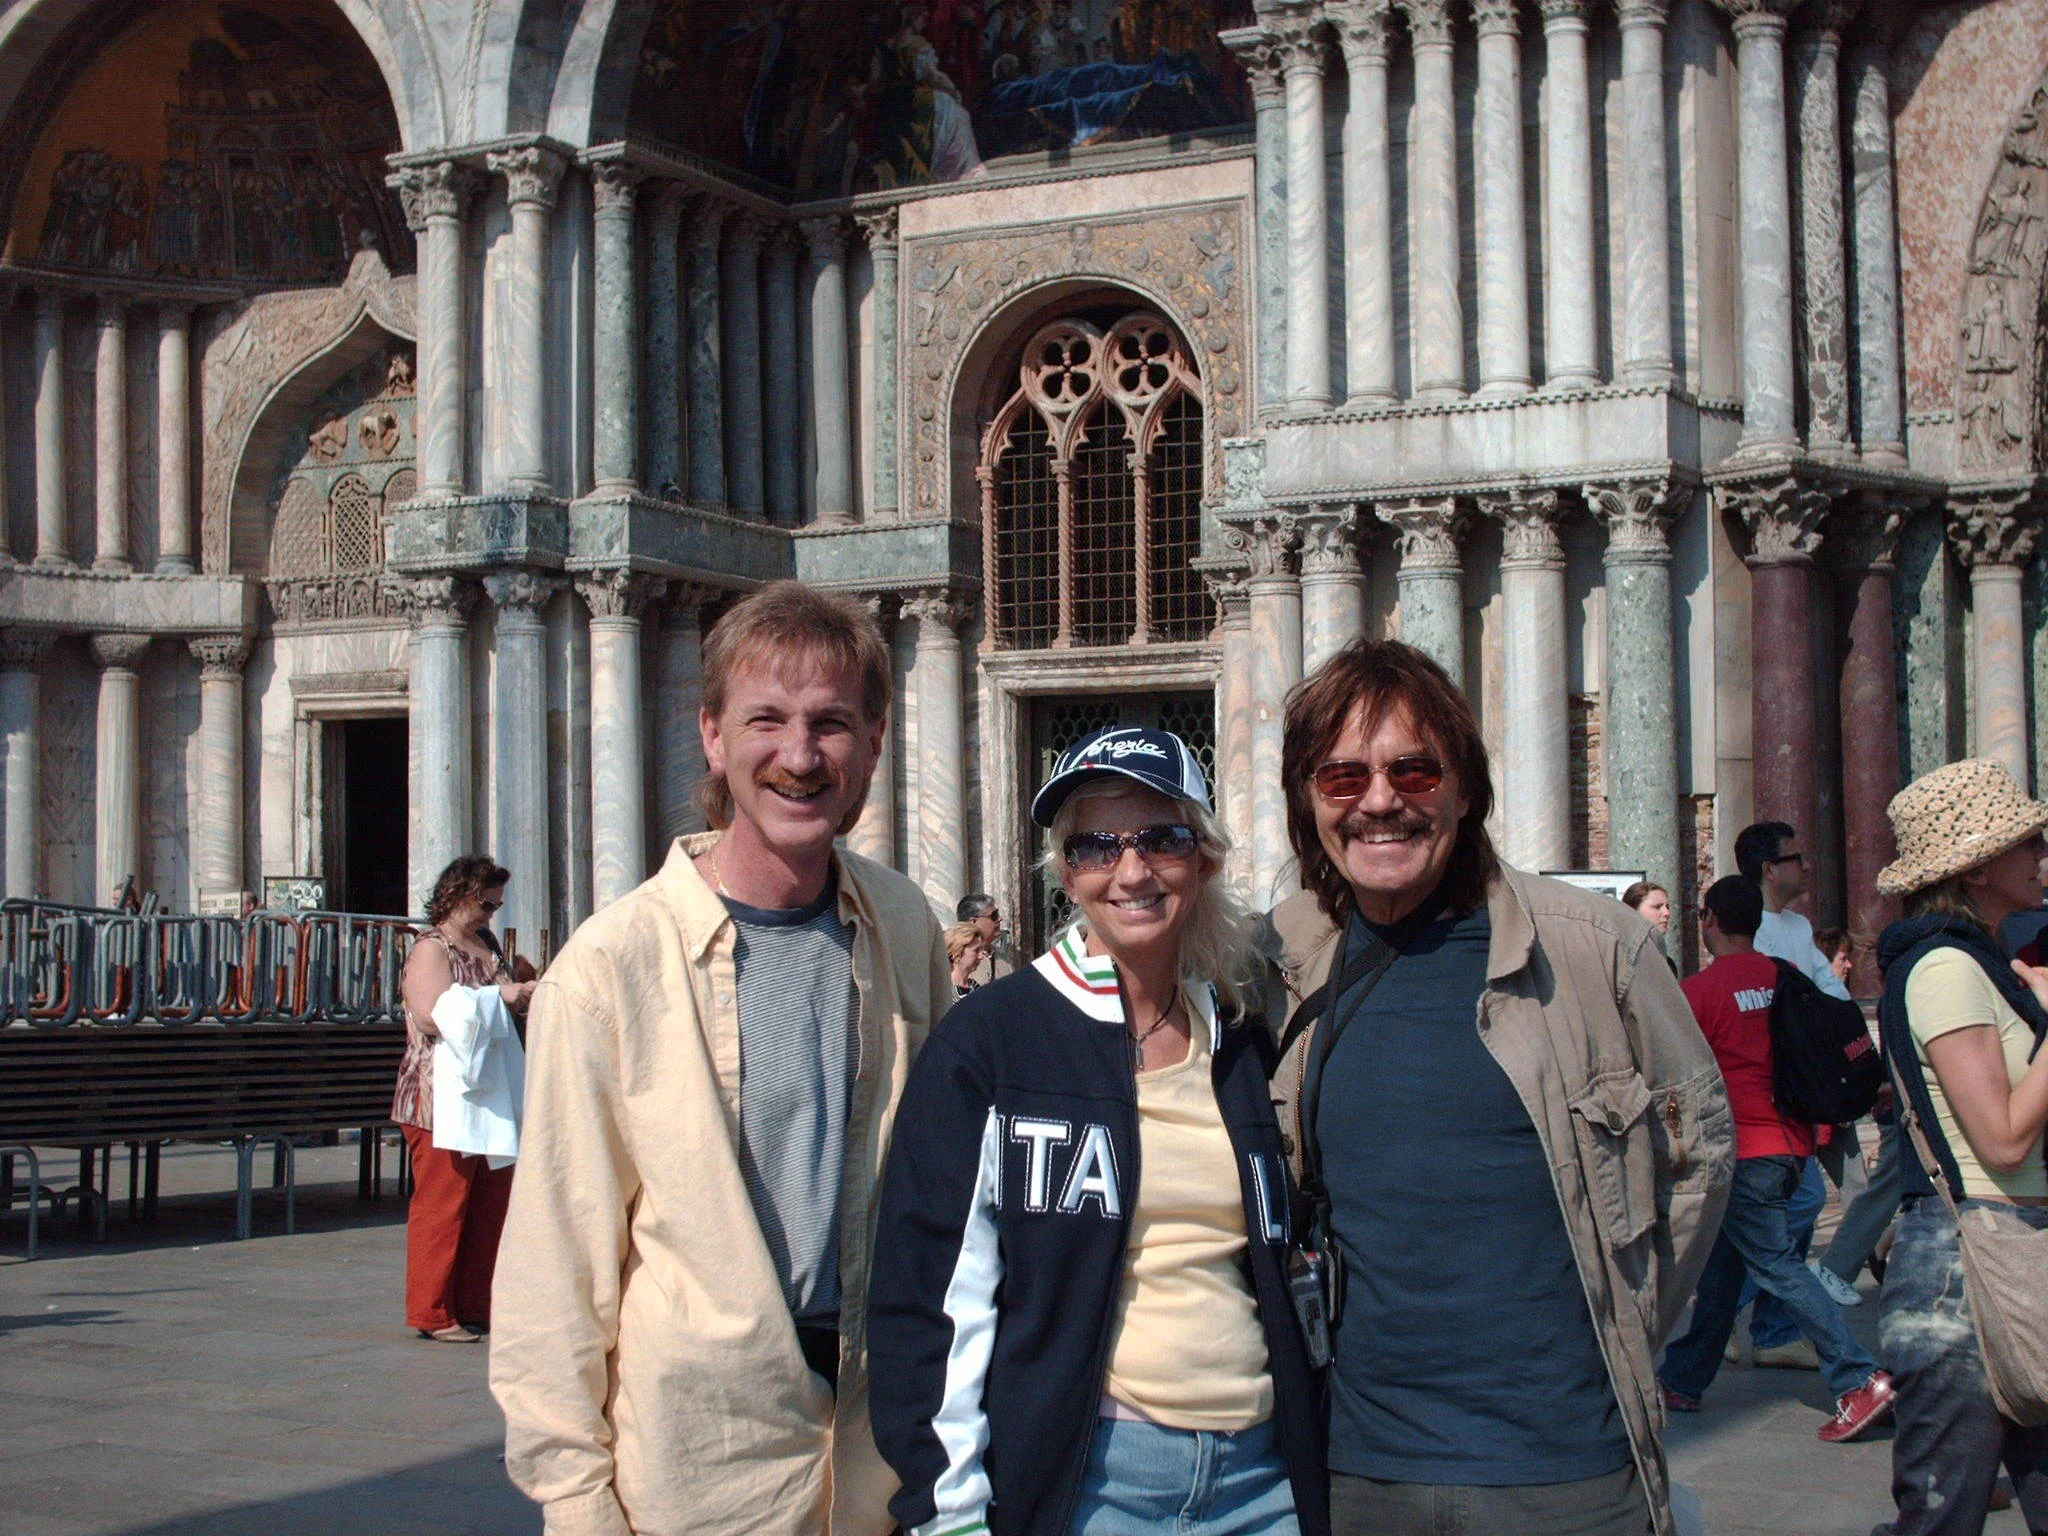 Rodney Kelley, Donna Moore, Rick Moore in front of St. Marks Basilica in Venice, Italy